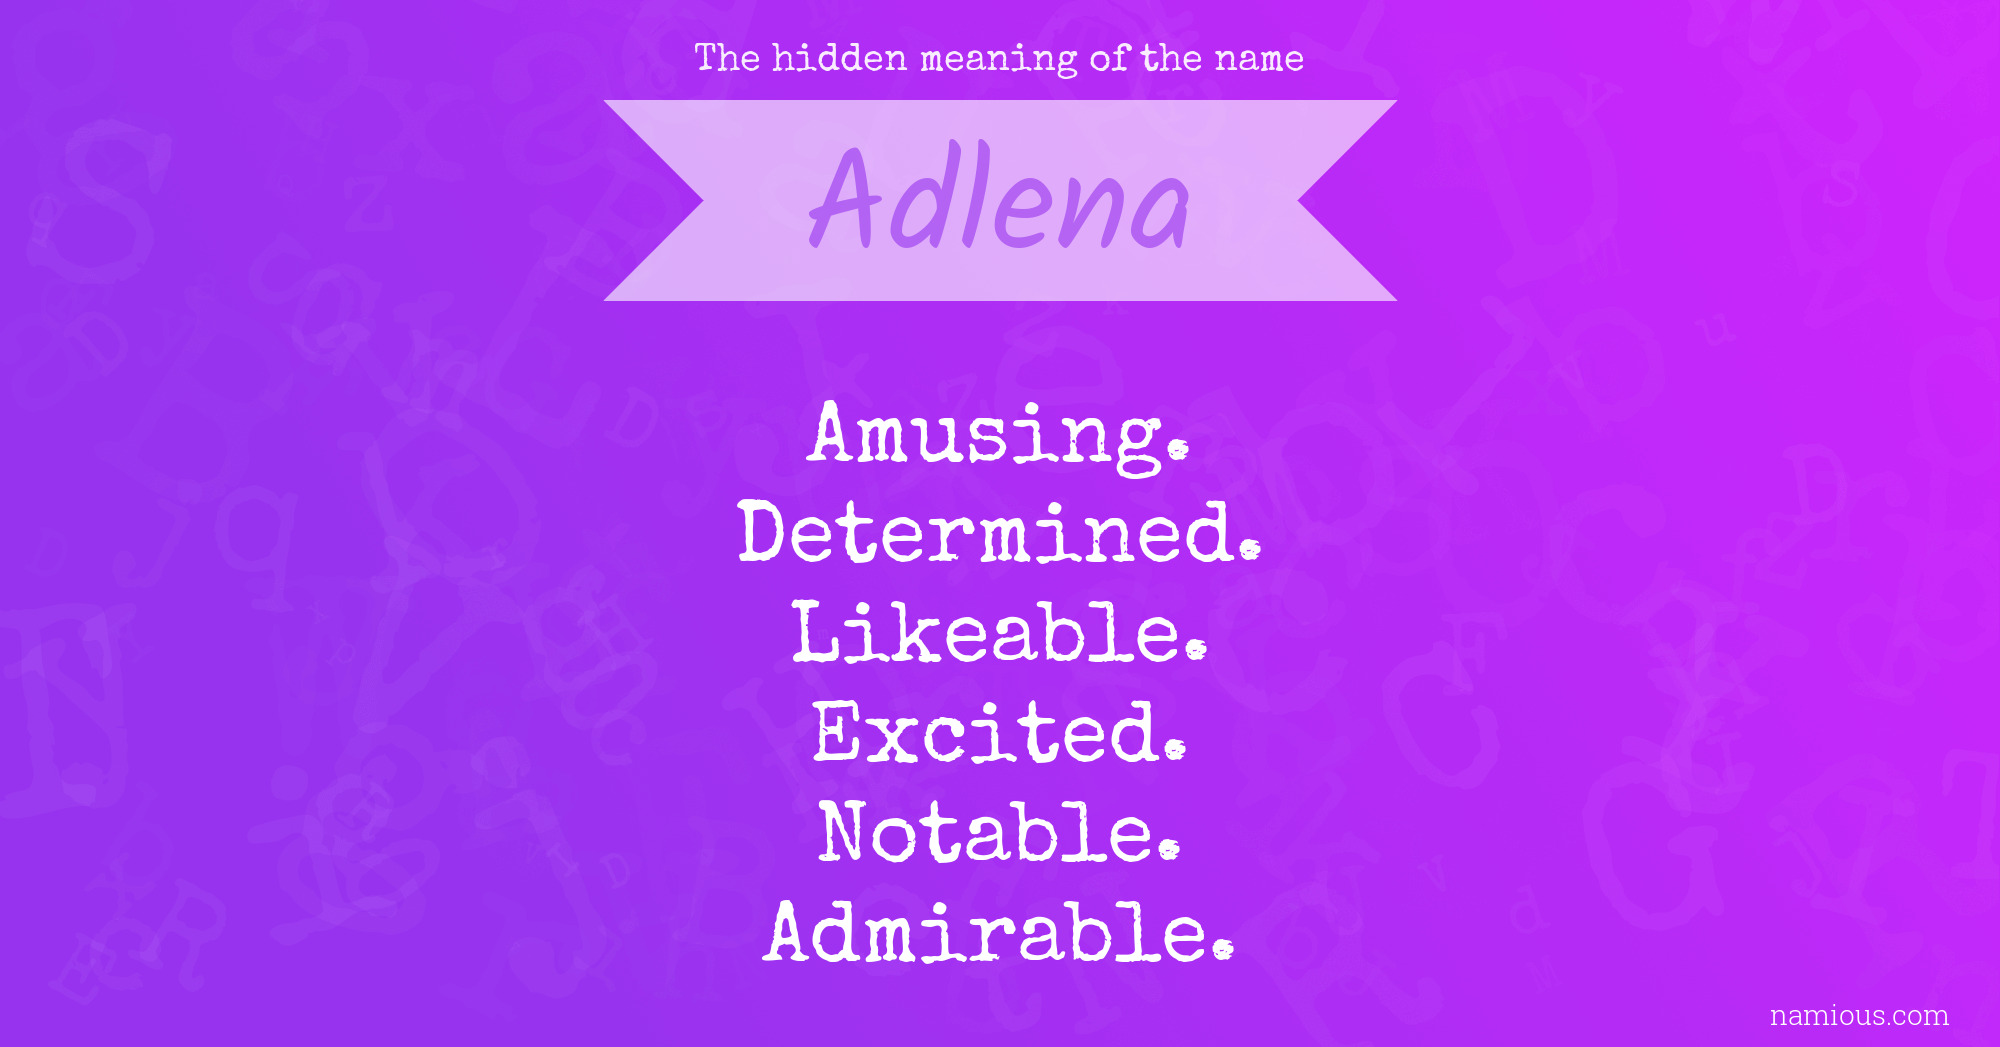 The hidden meaning of the name Adlena